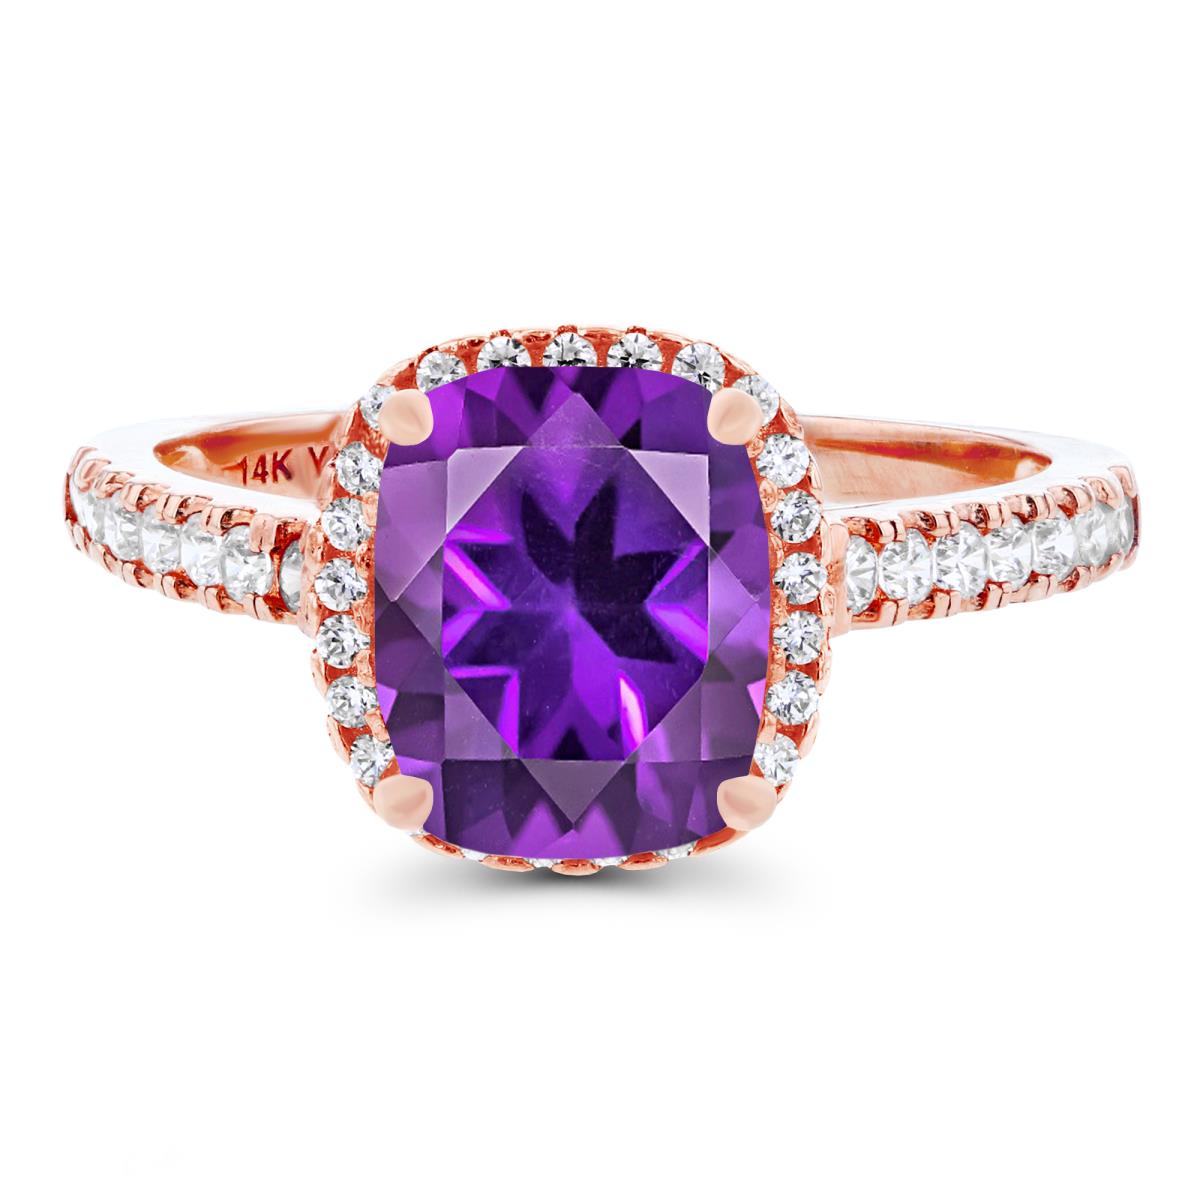 14K Rose Gold 9x7mm Cushion Amethyst & Created White Sapphire Halo Ring